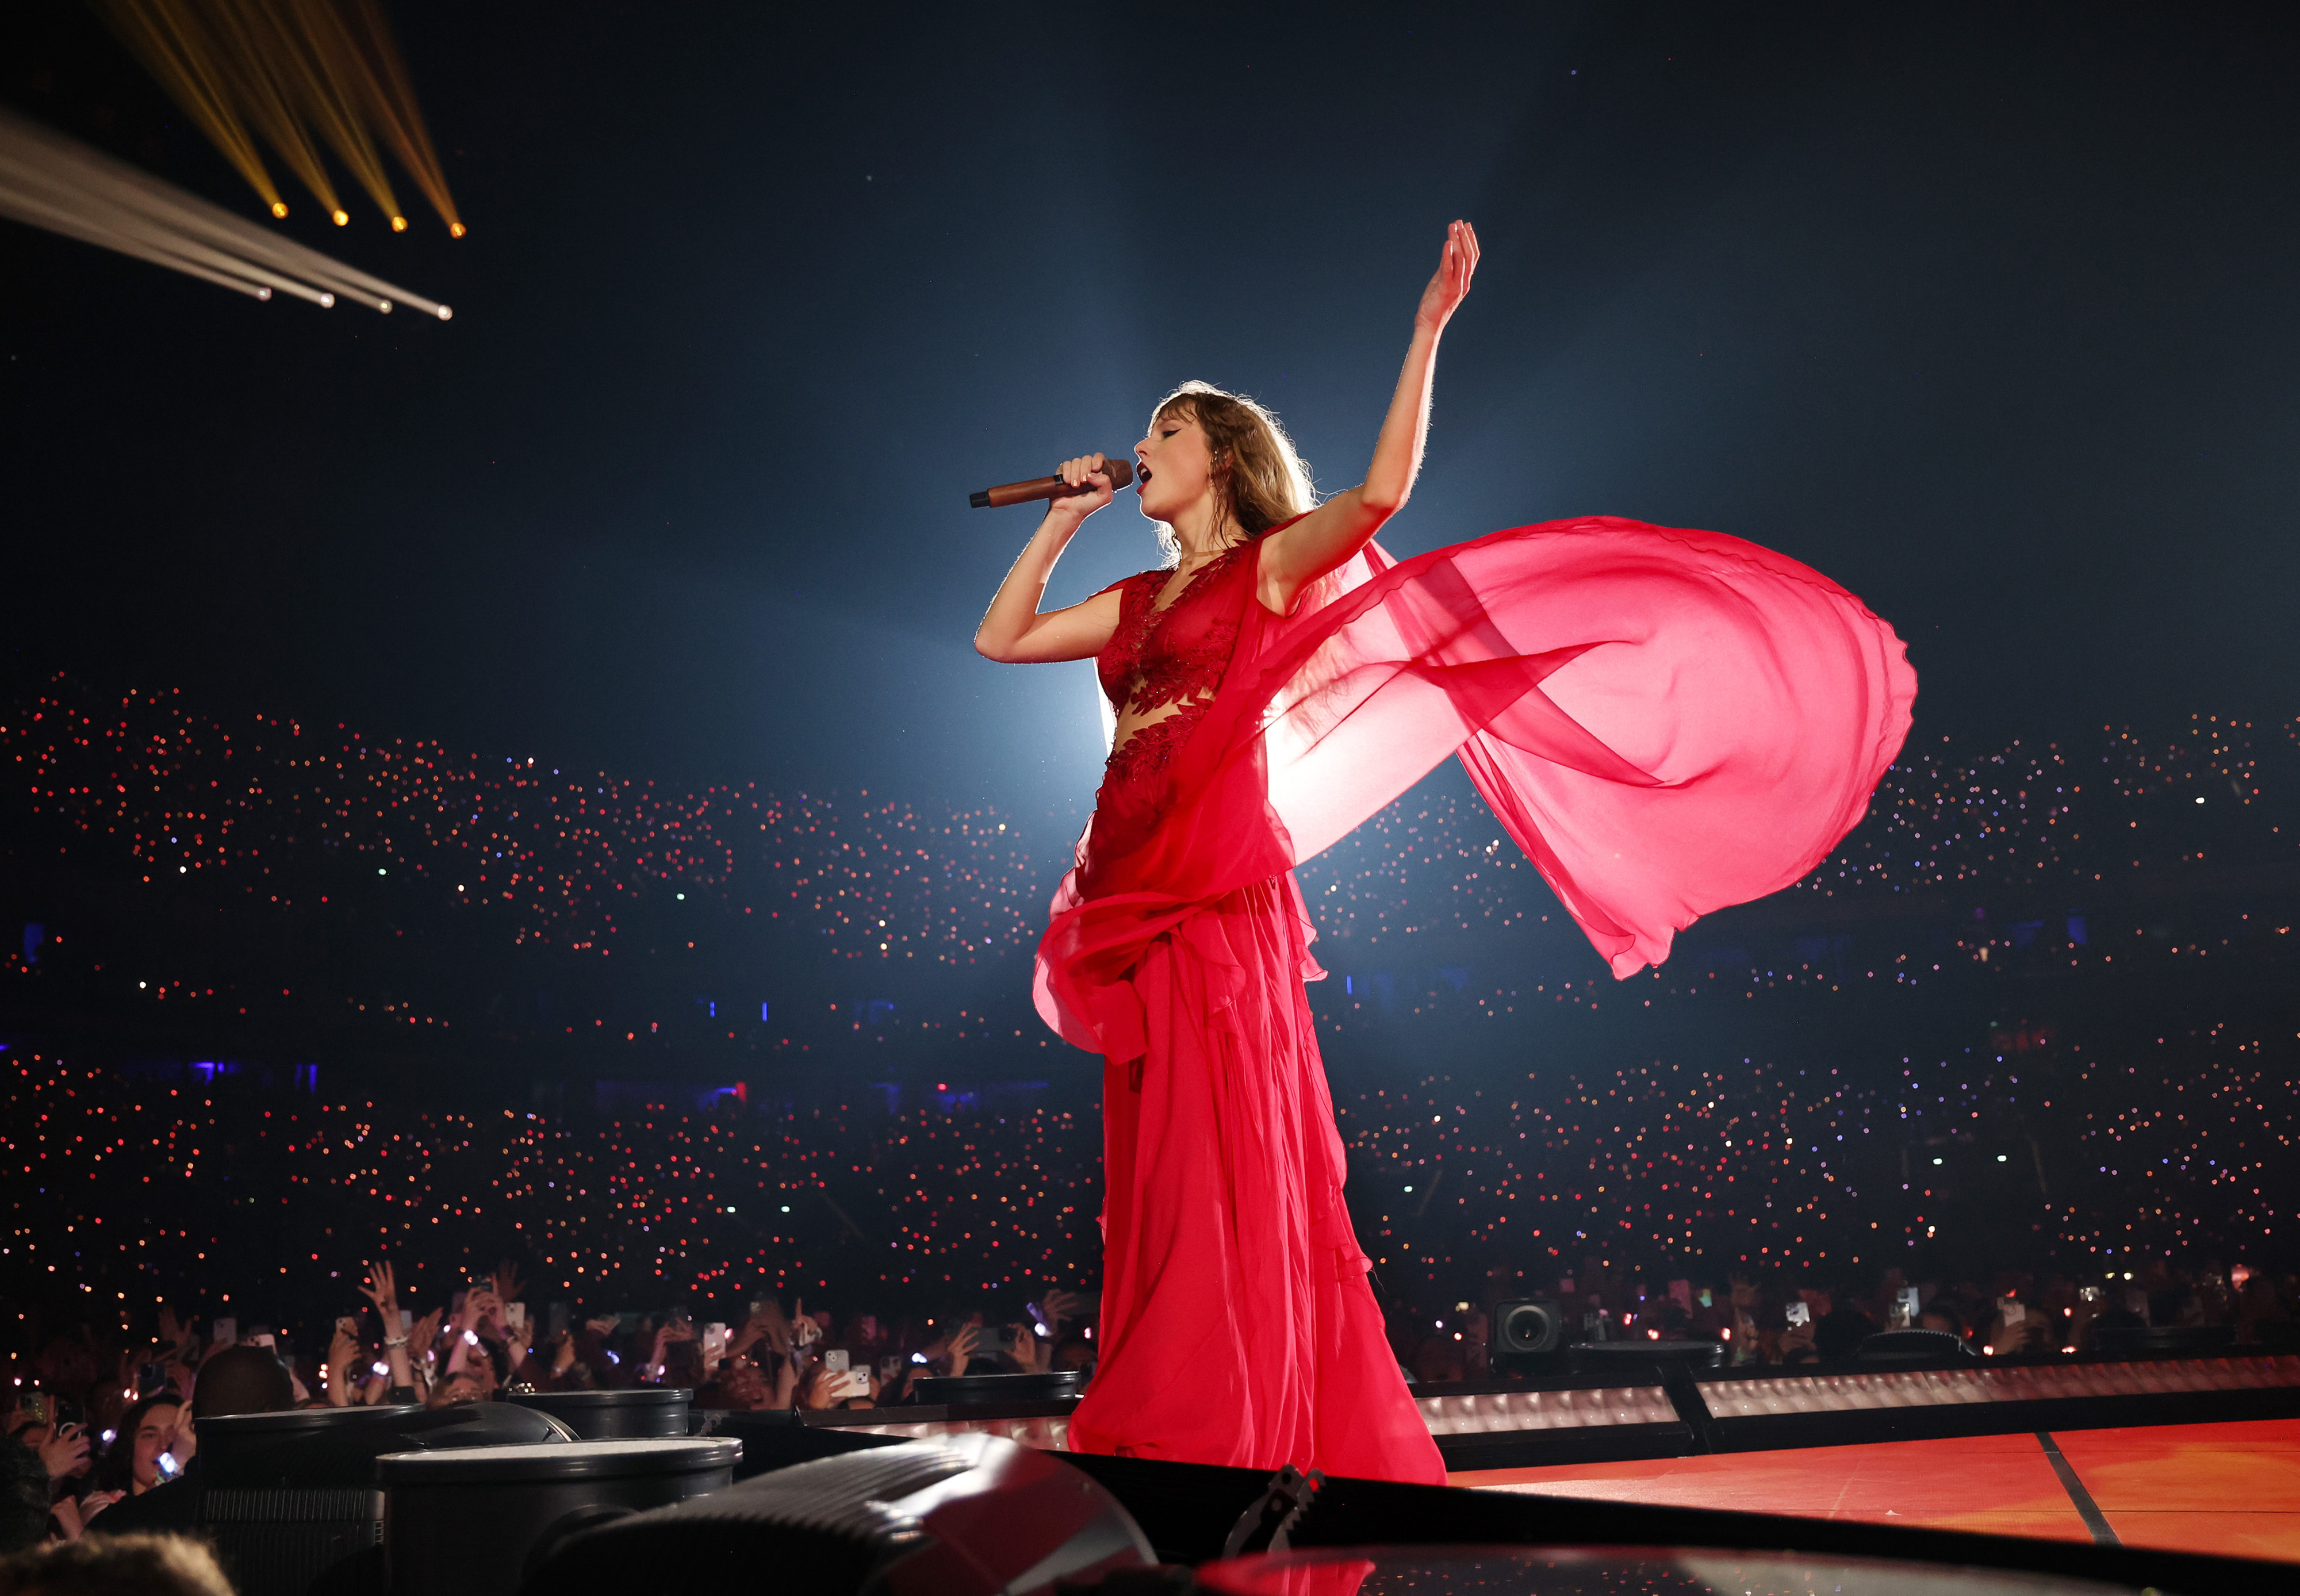 Taylor Swift in flowy dress performing on stage